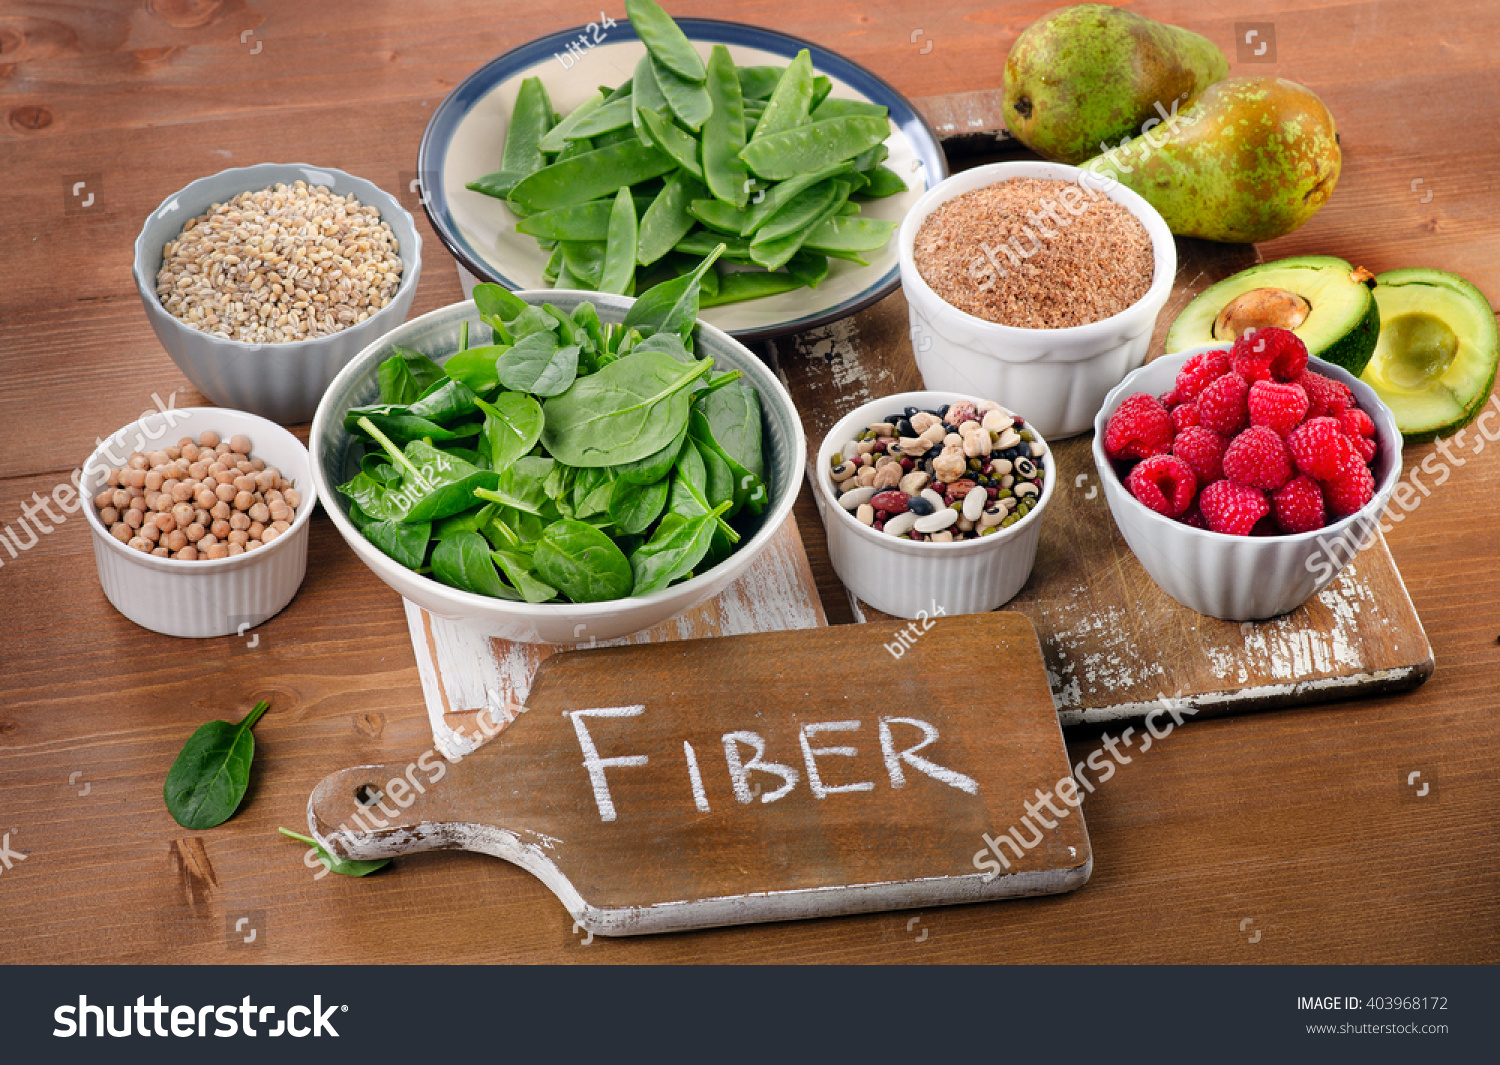 Foods rich in Fiber on a wooden table. Healthy eating. Selective focus #403968172